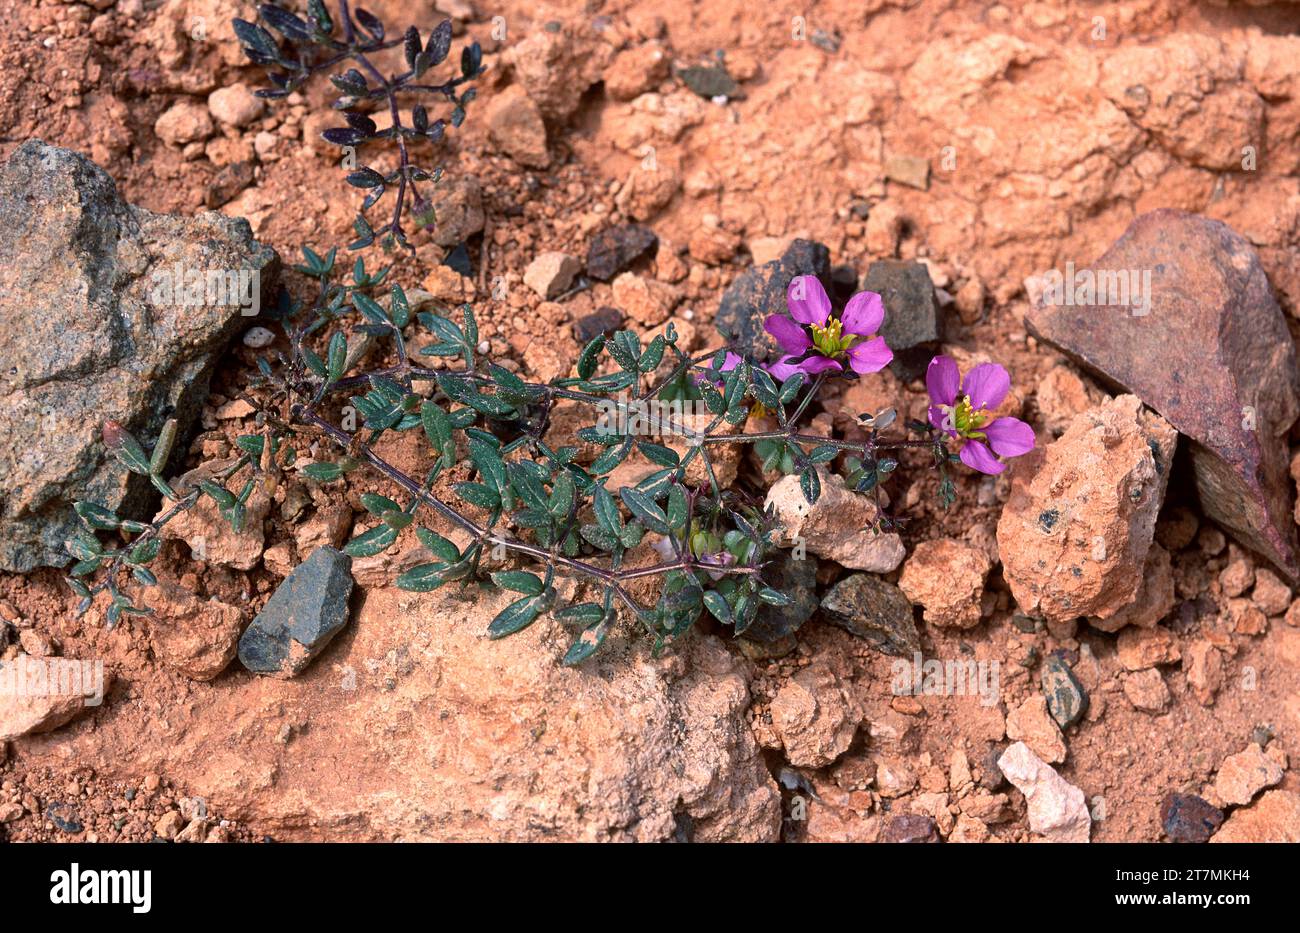 Virgin's mantle (Fagonia cretica) is an annual prostrate herb native to Mediterranean basin and Canary Islands. This photo was taken in Fuerteventura, Stock Photo